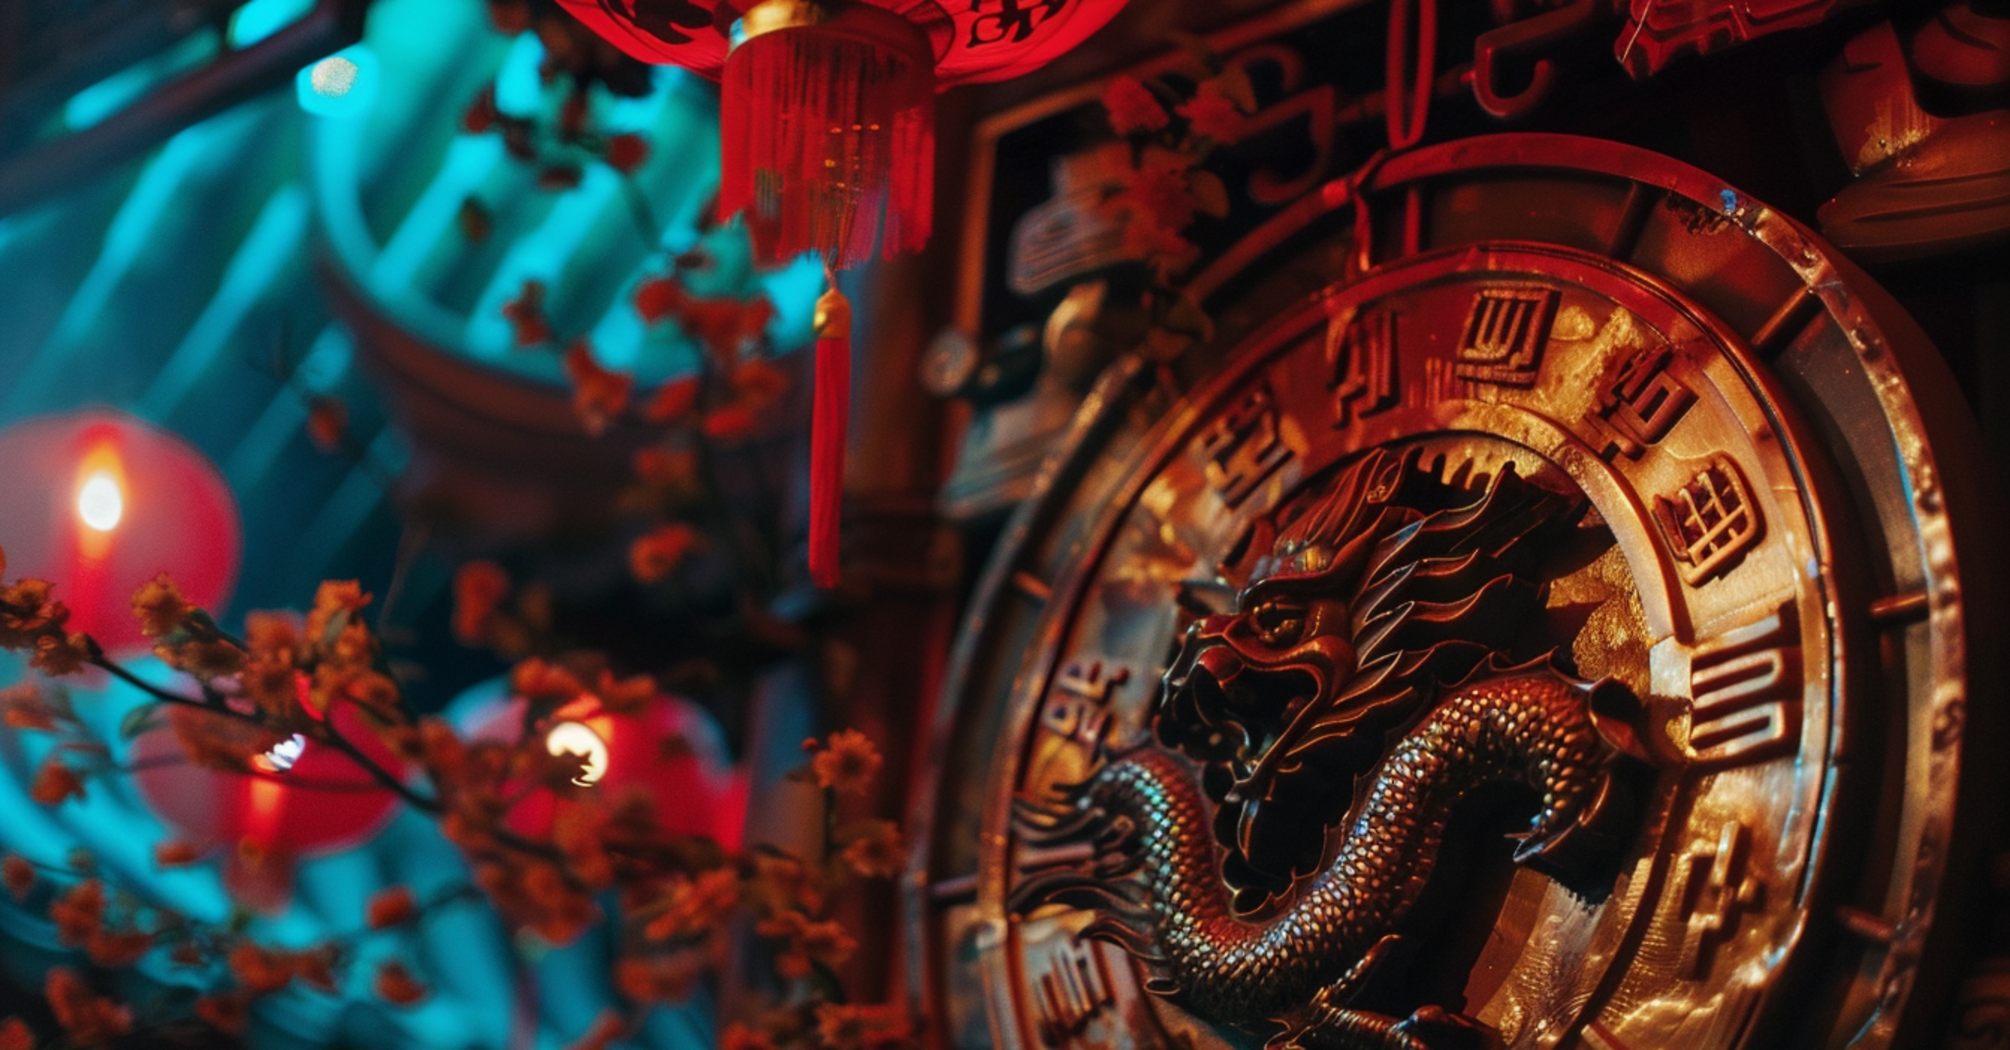 A burst of energy and motivation: Chinese horoscope for June 1